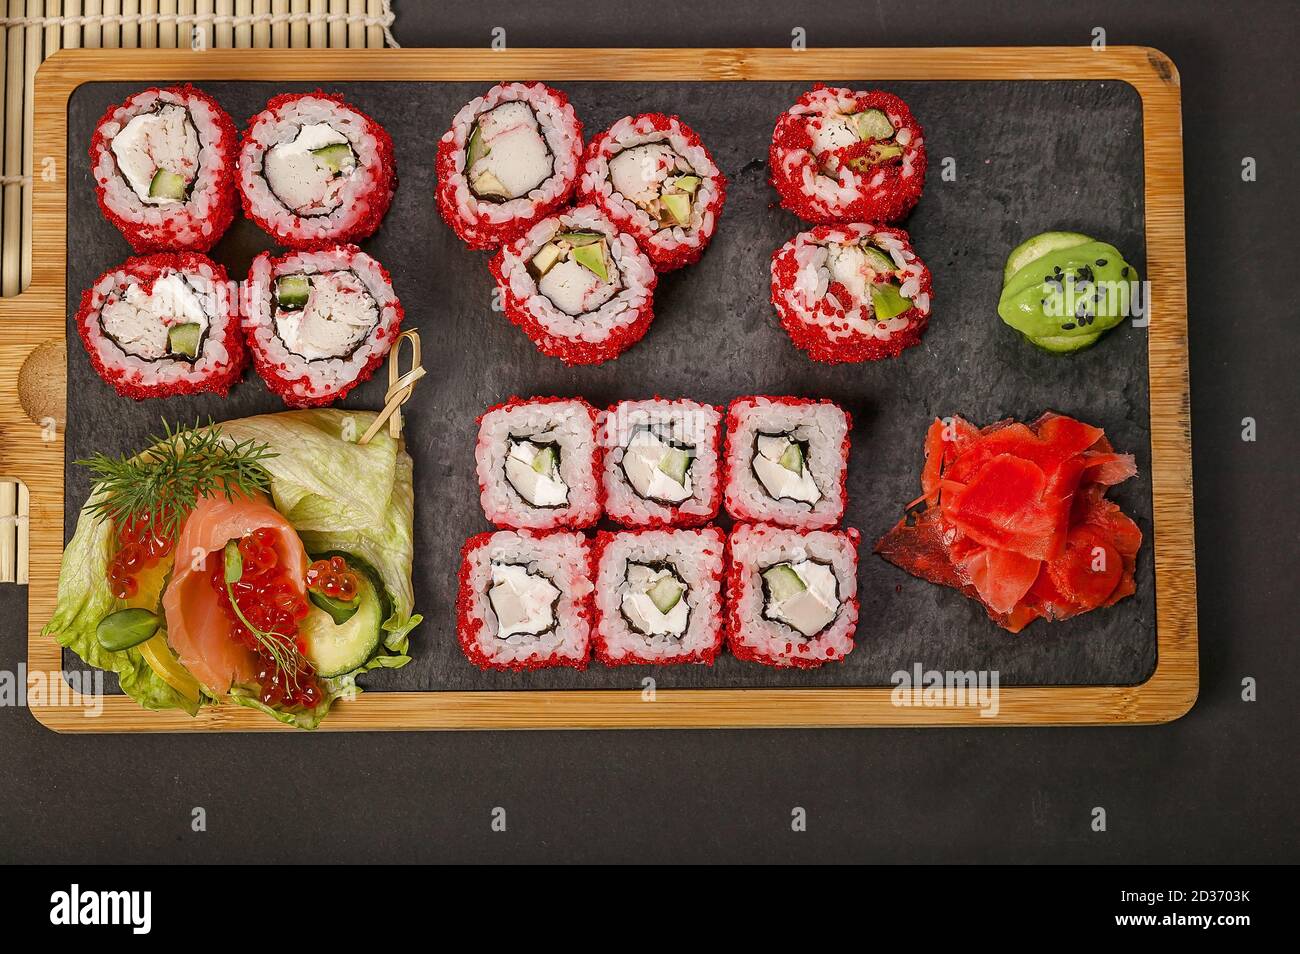 https://c8.alamy.com/comp/2D3703K/japanese-sushi-roll-set-with-red-flying-fish-caviar-pickled-ginger-spicy-wasabi-paste-and-soy-sauce-top-view-2D3703K.jpg